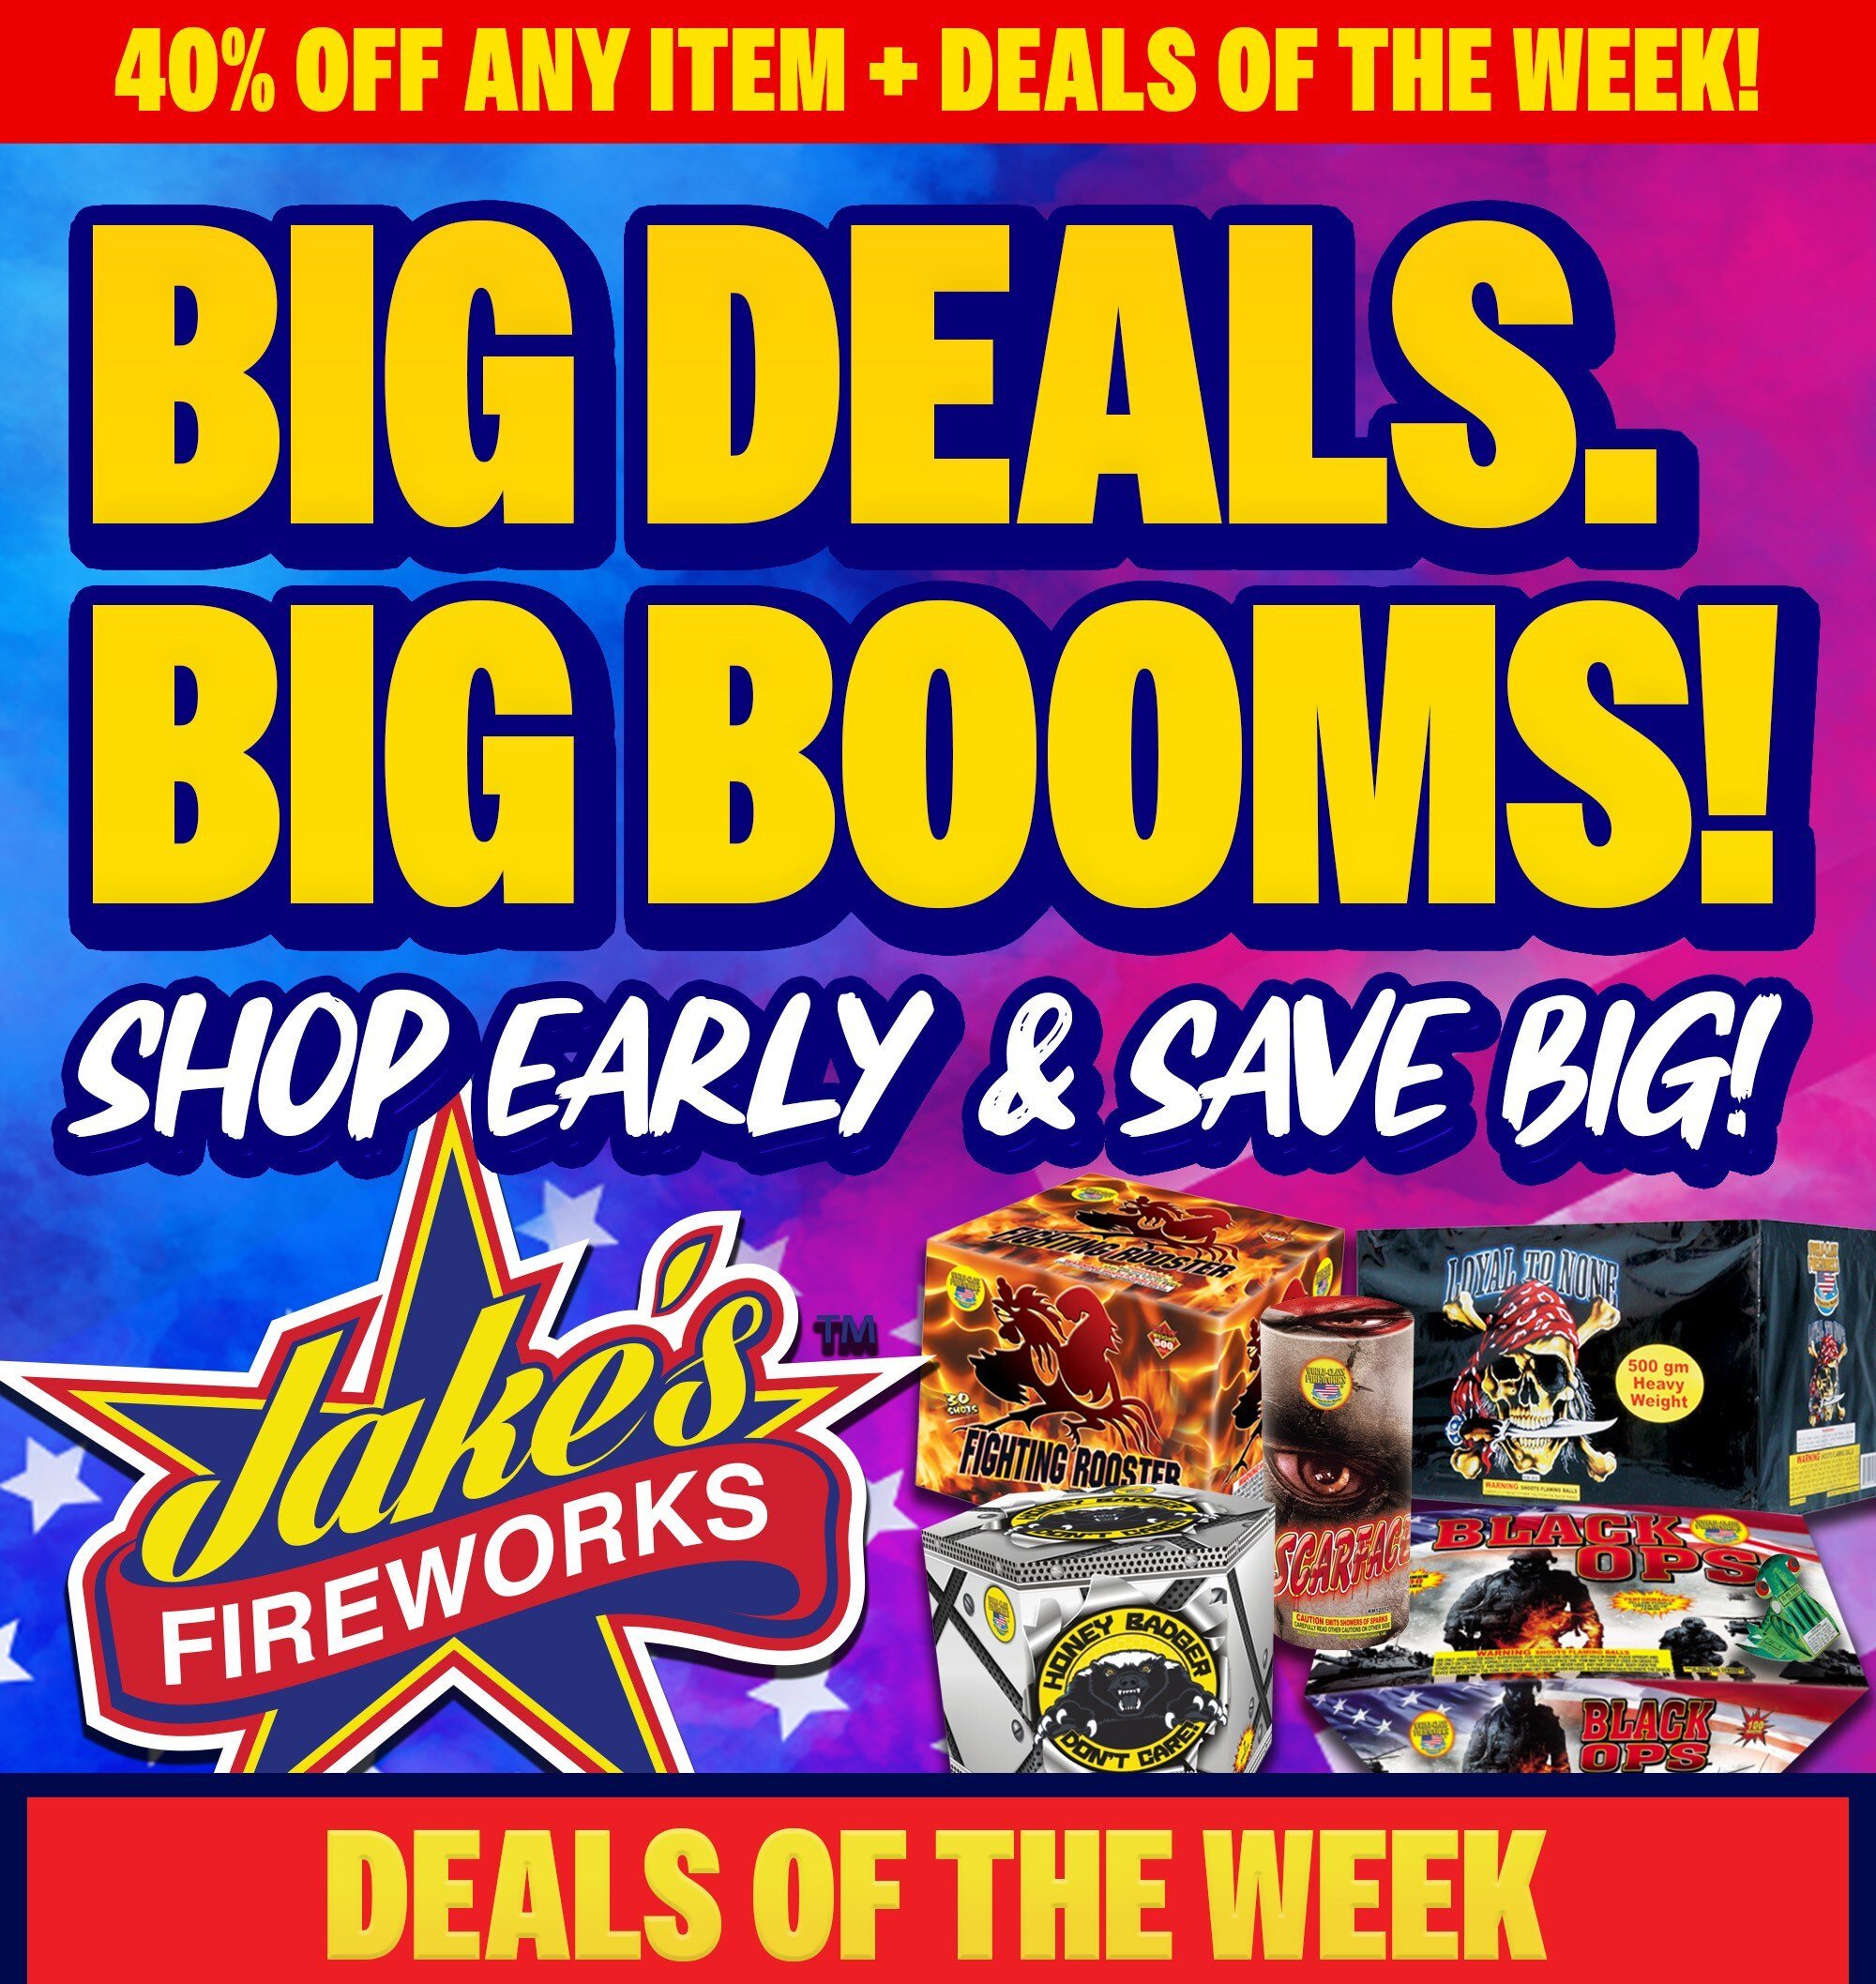 Daily Deals - Week of 06/03 - Shop at Jake's and Save